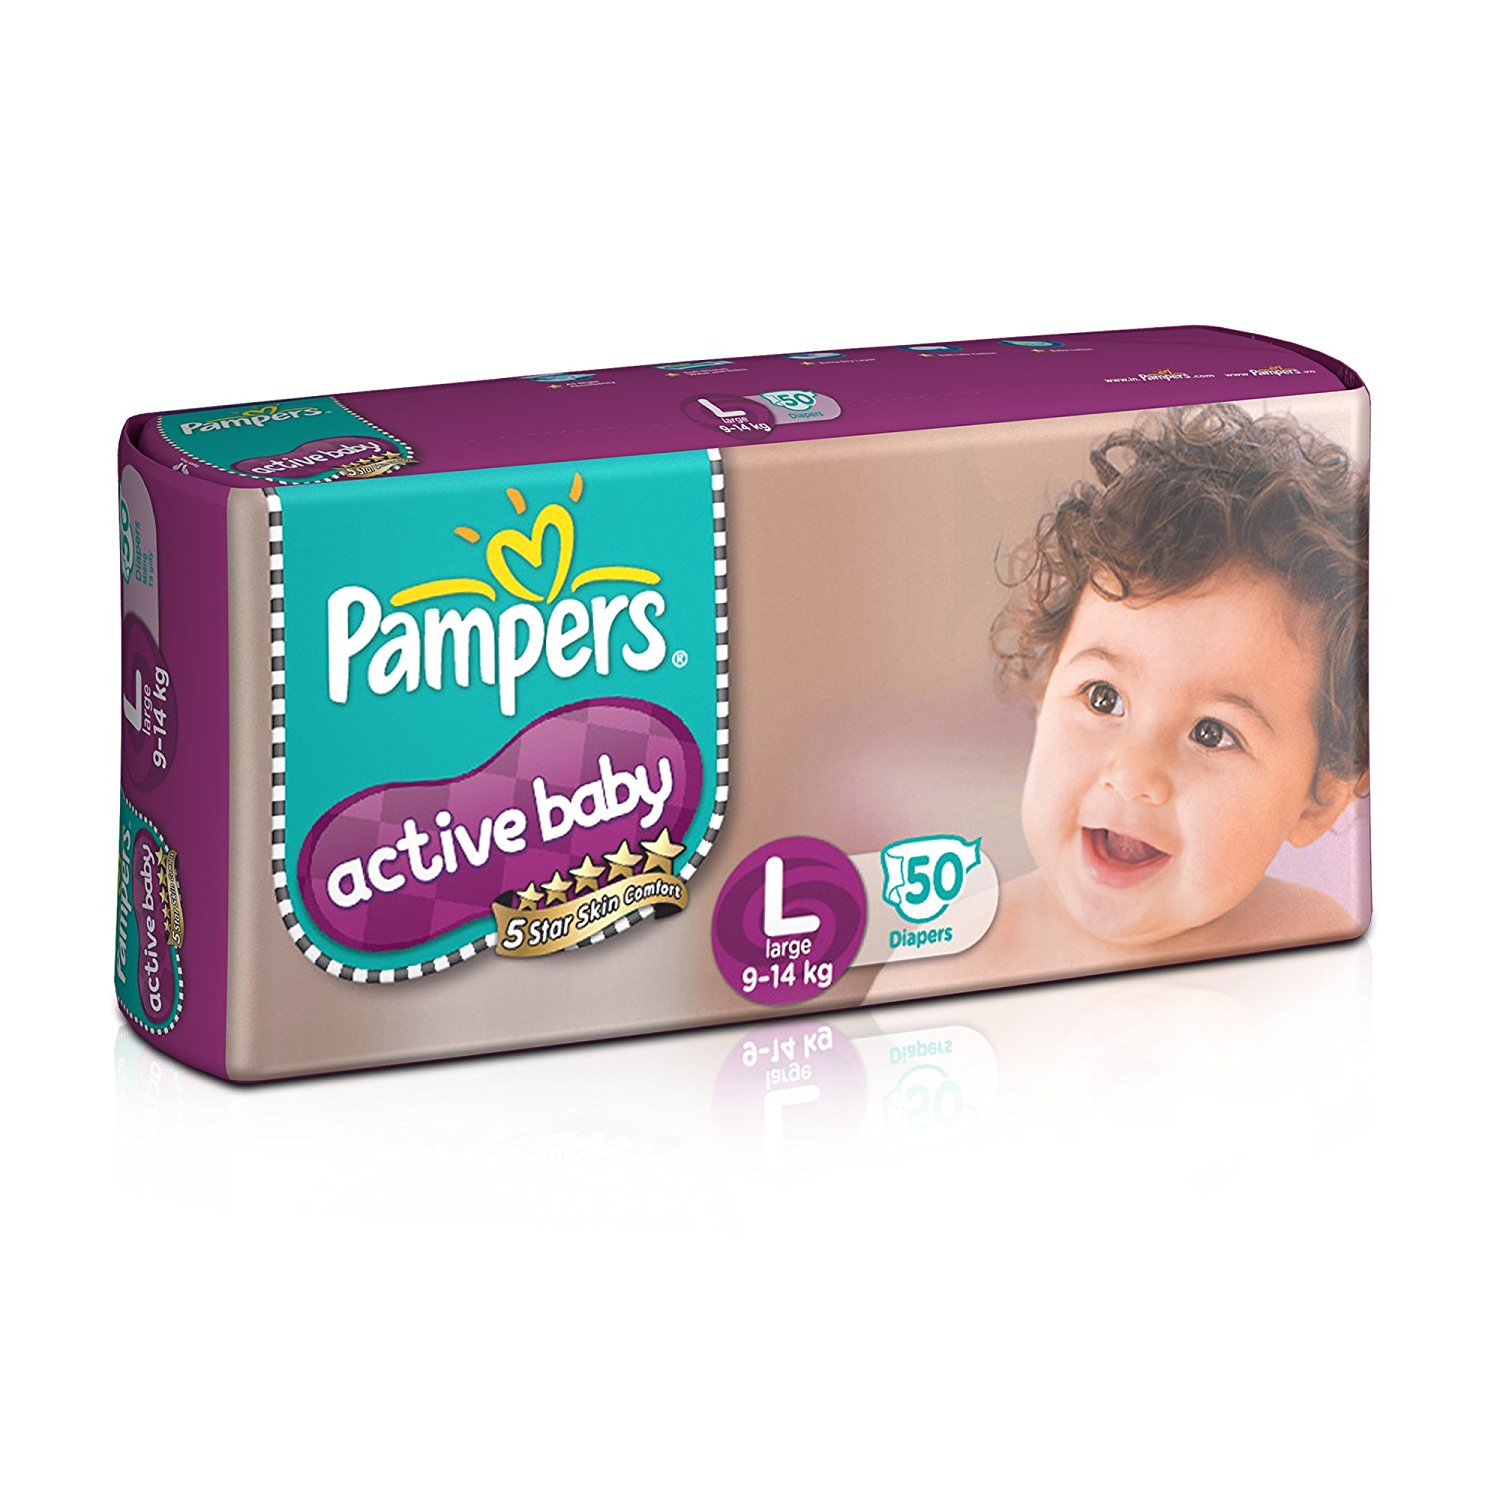 Pampers Active Baby Large Size Diaper (50 Count)